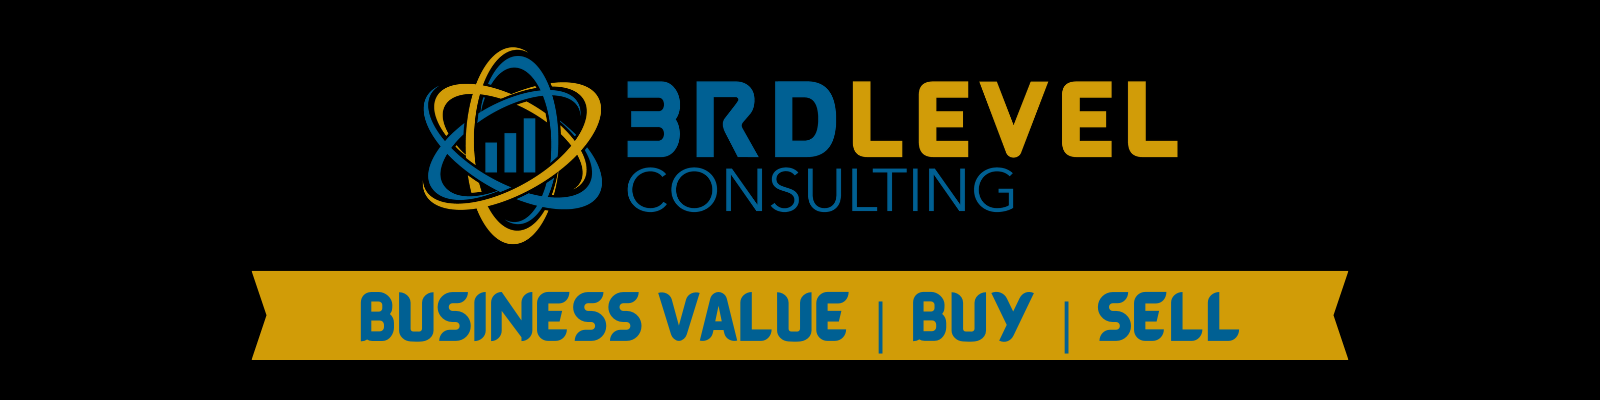 3rd Level Consulting Logo